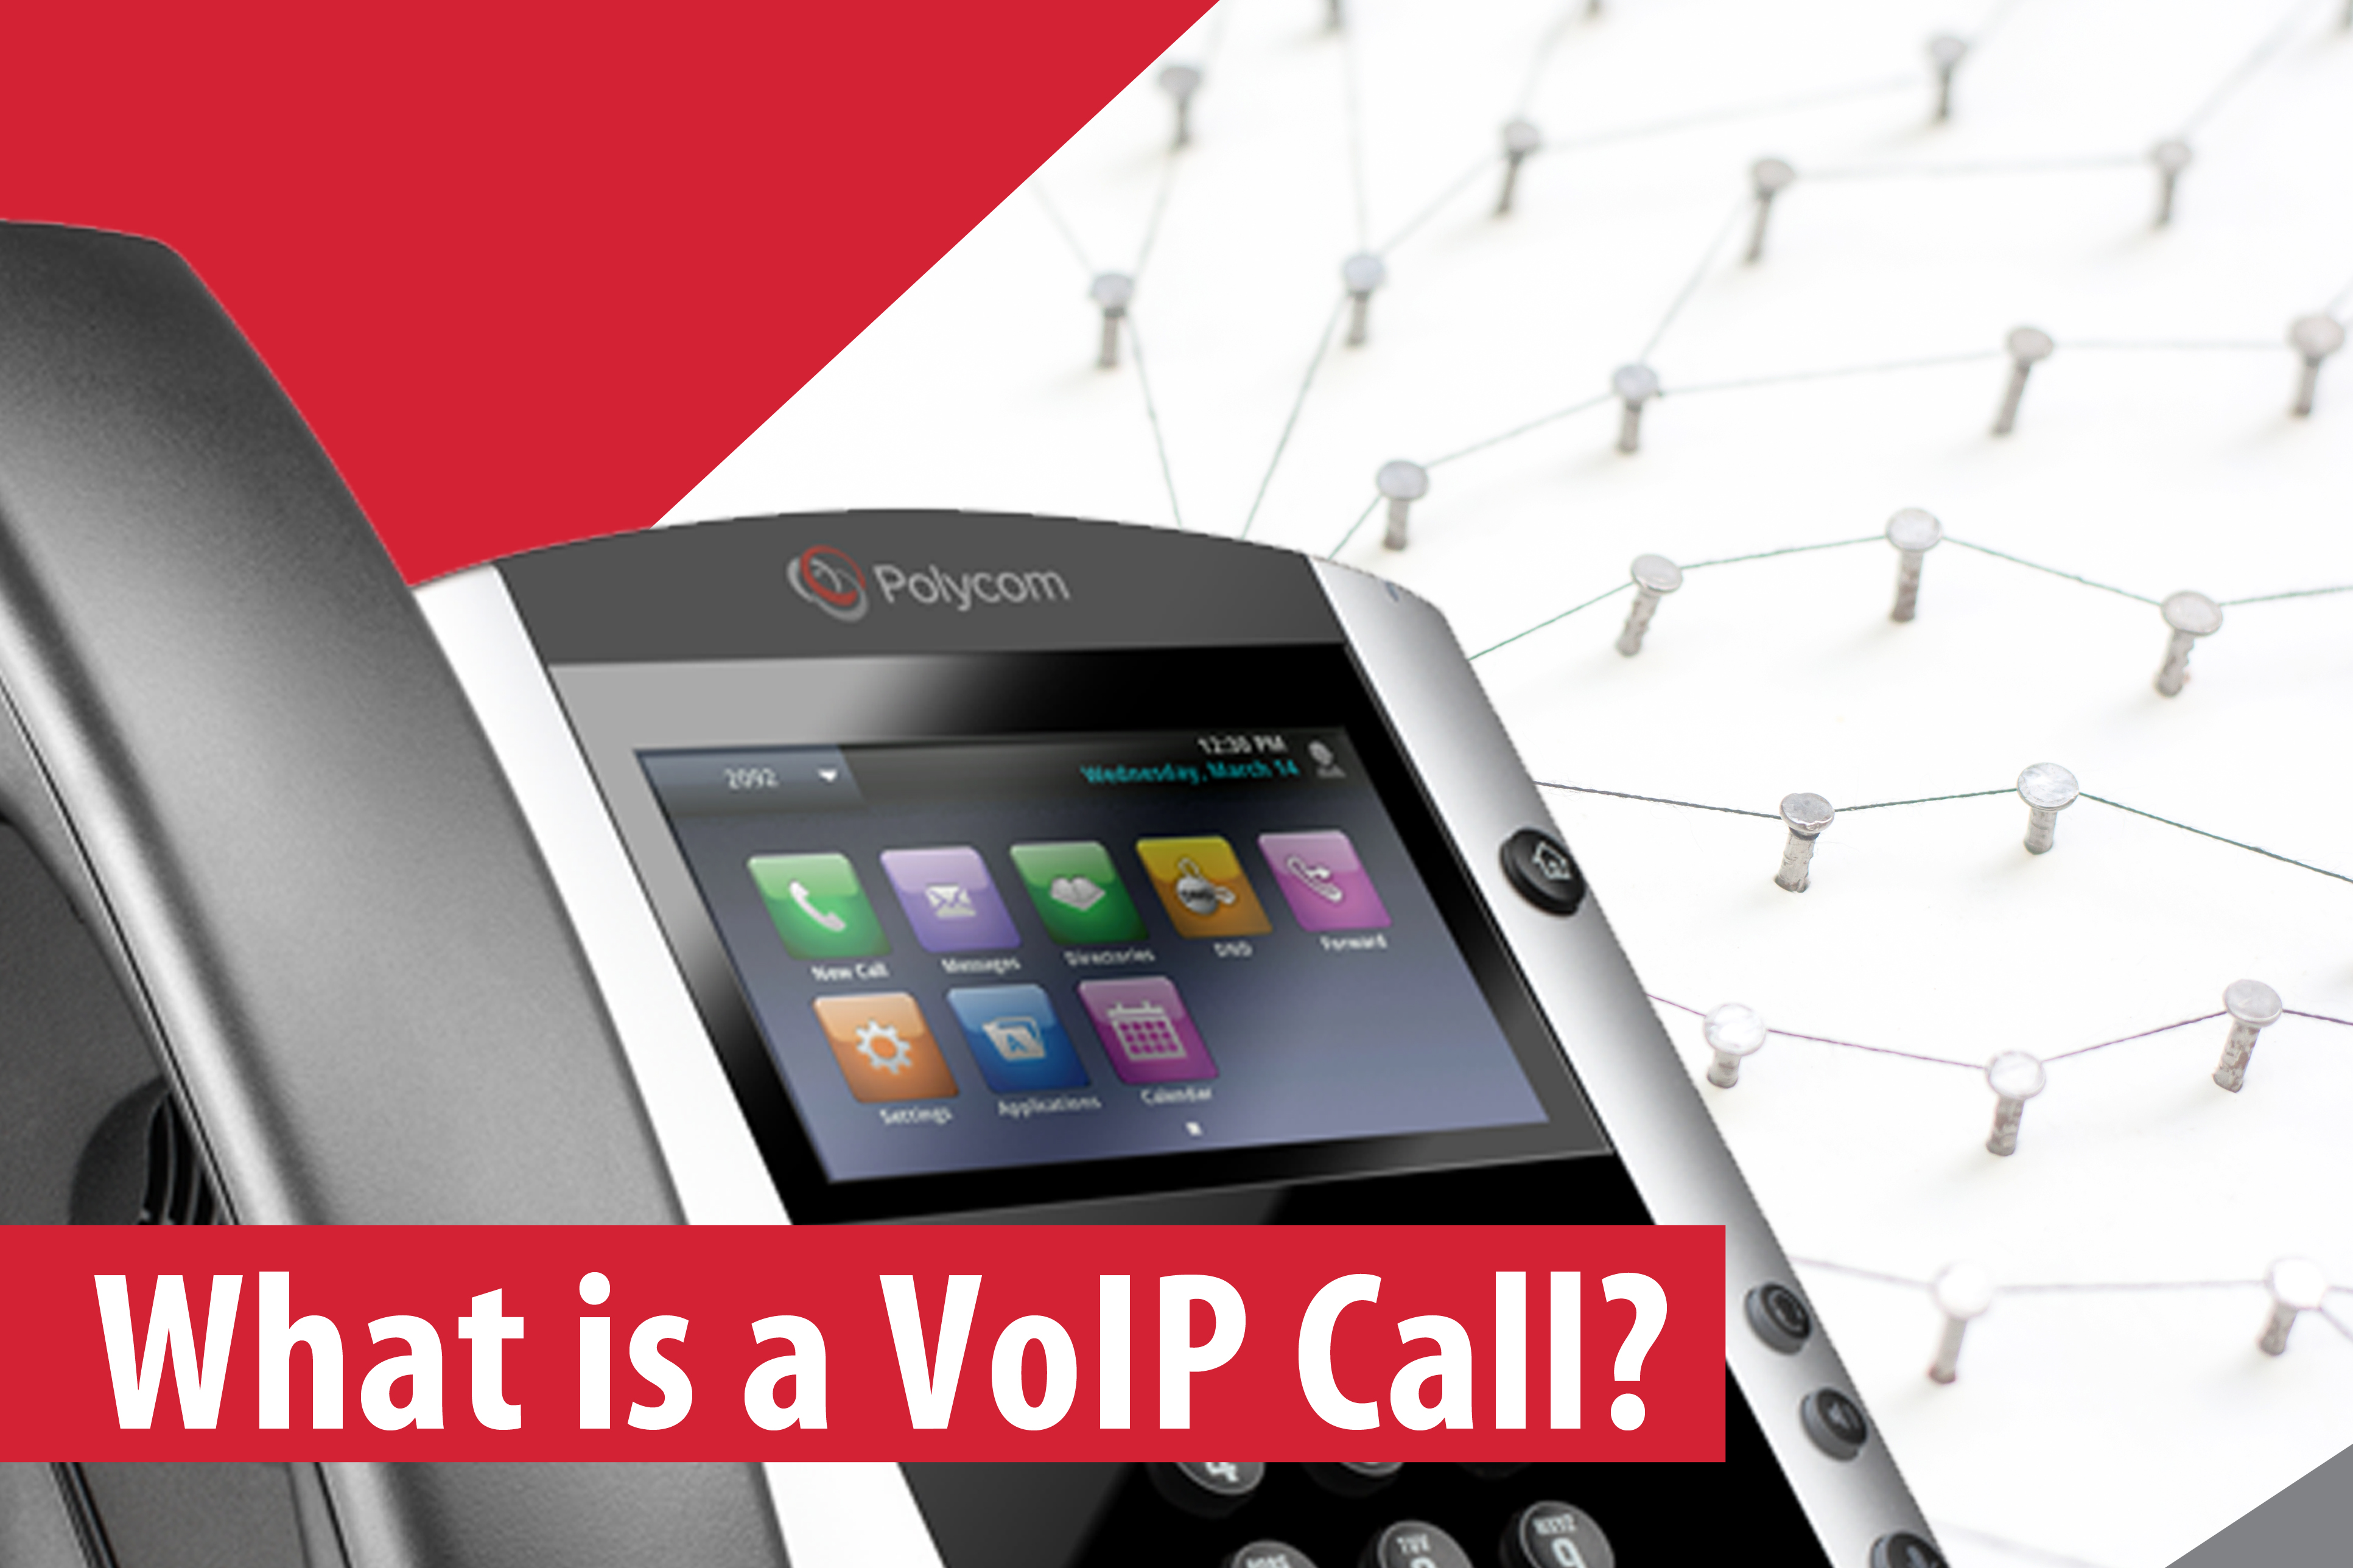 What is a VoIP Call?